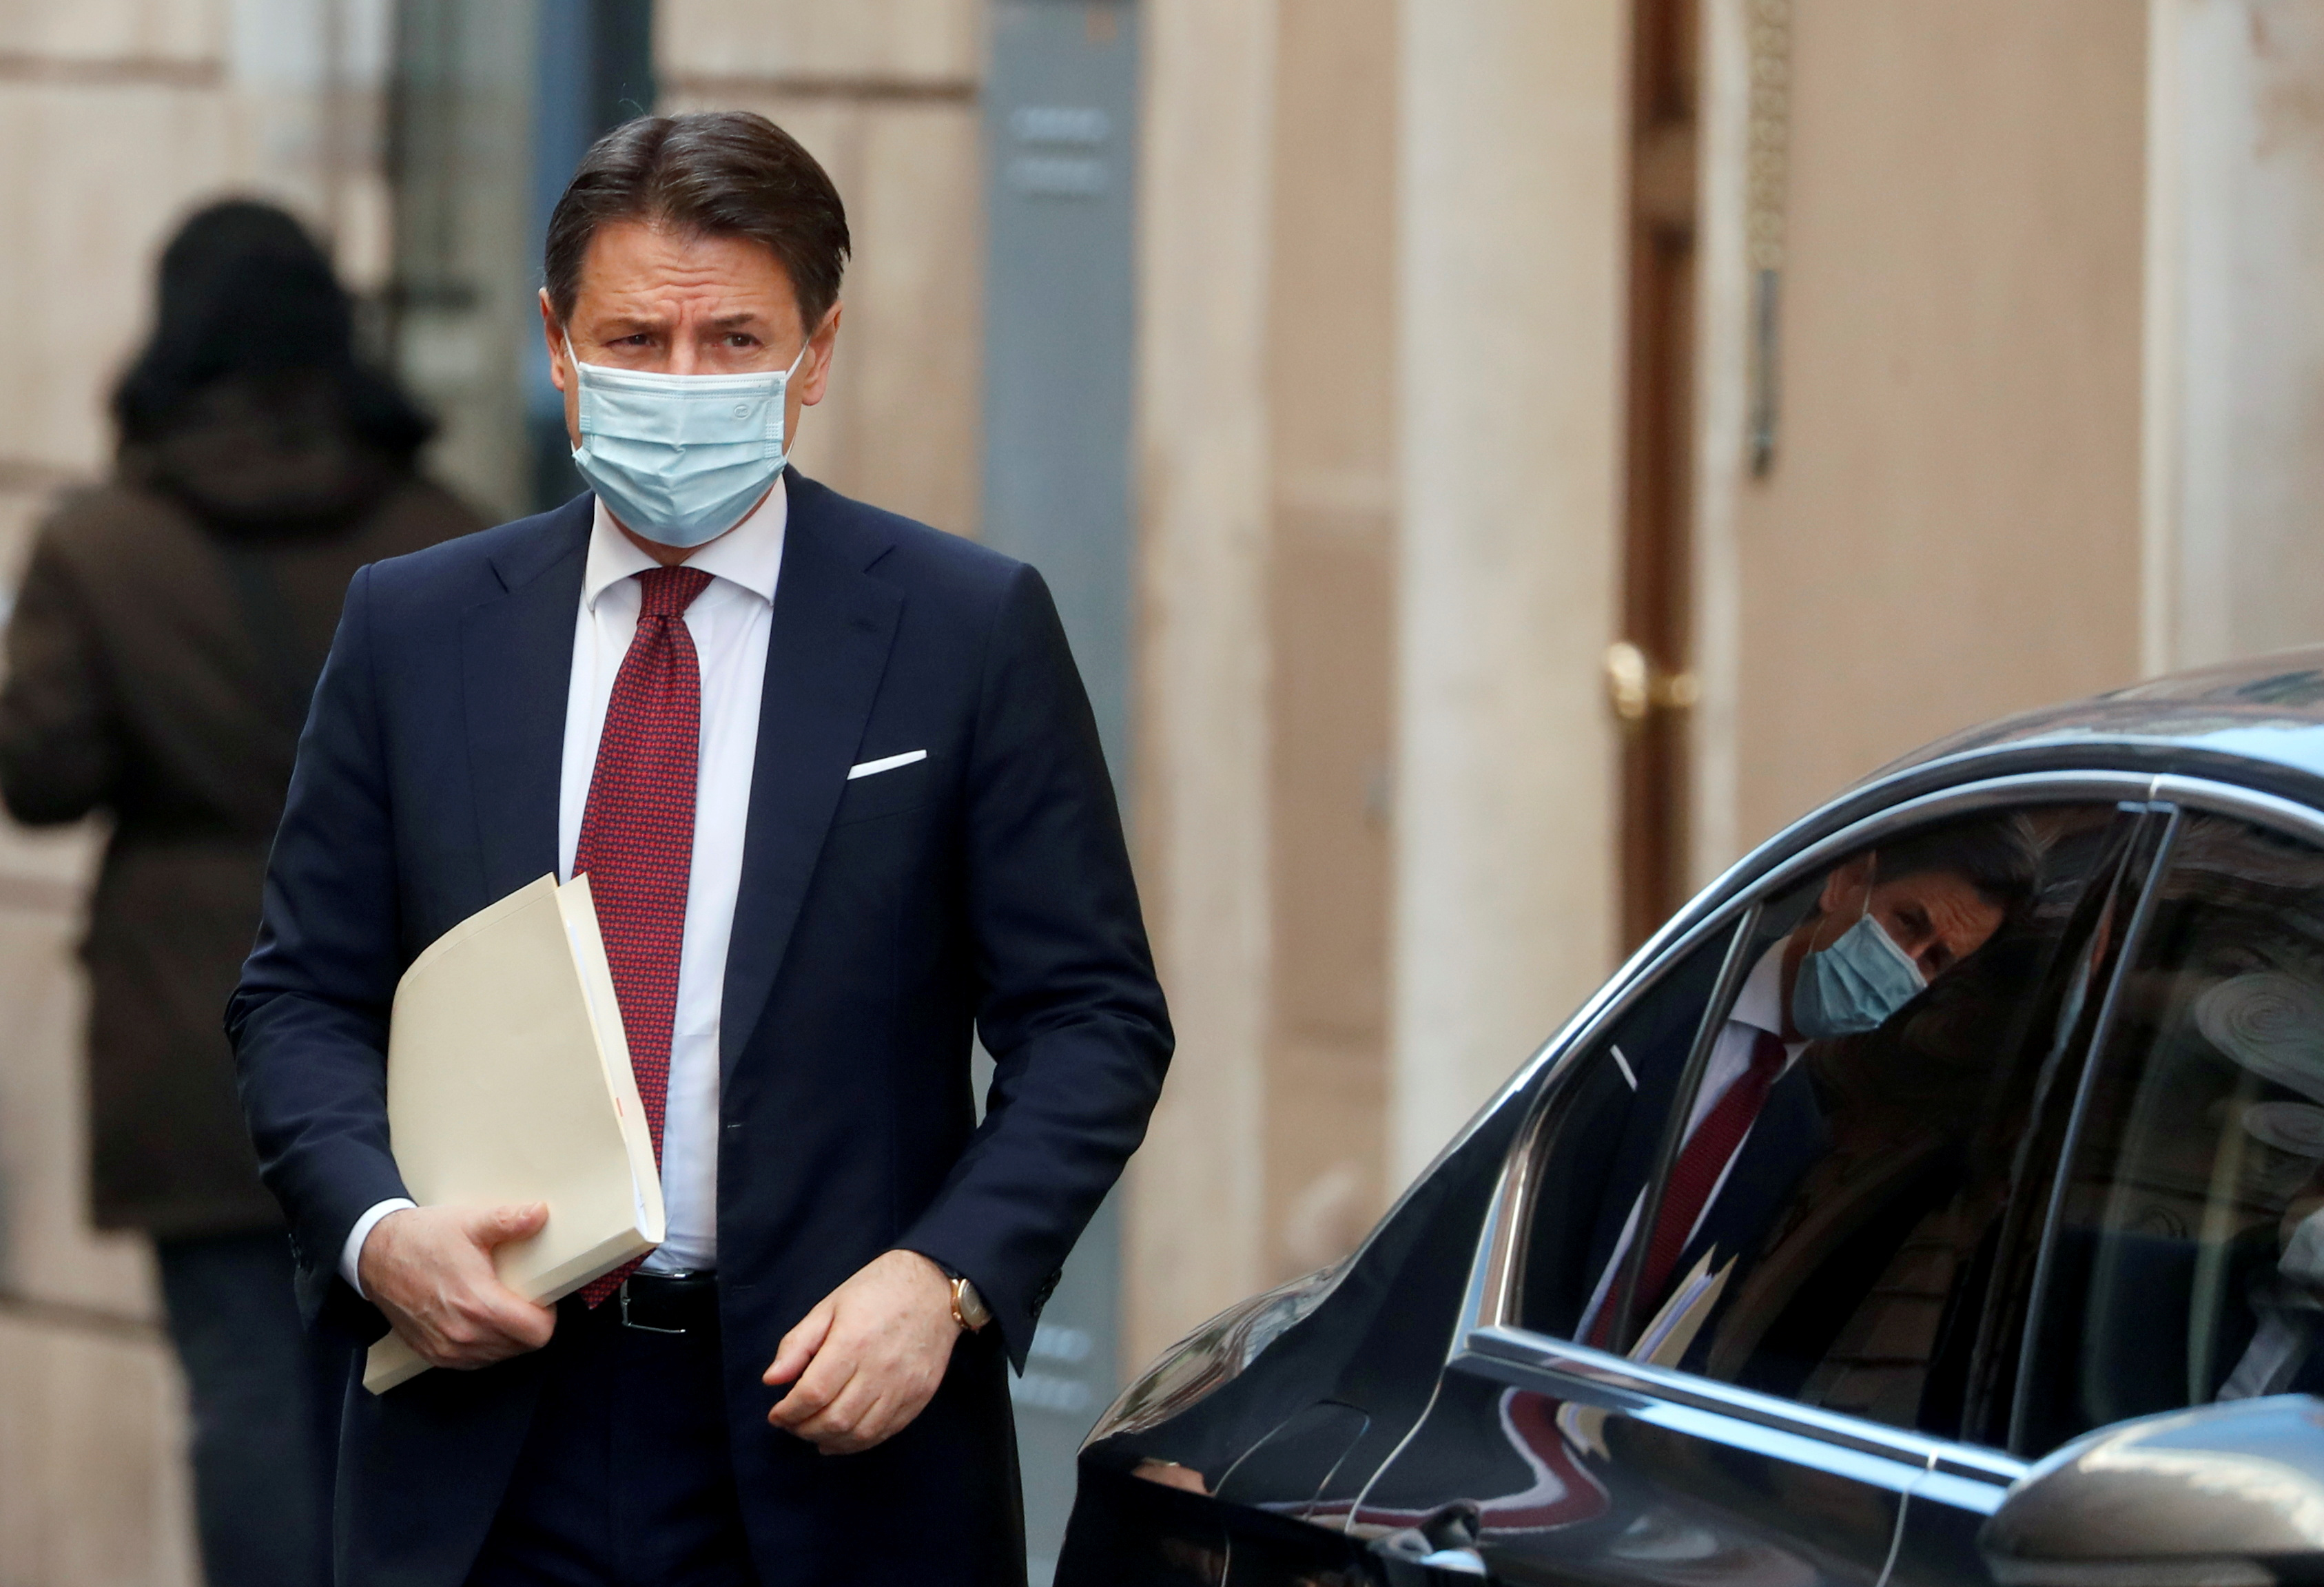 Italy's caretaker Prime Minister Giuseppe Conte leaves his house